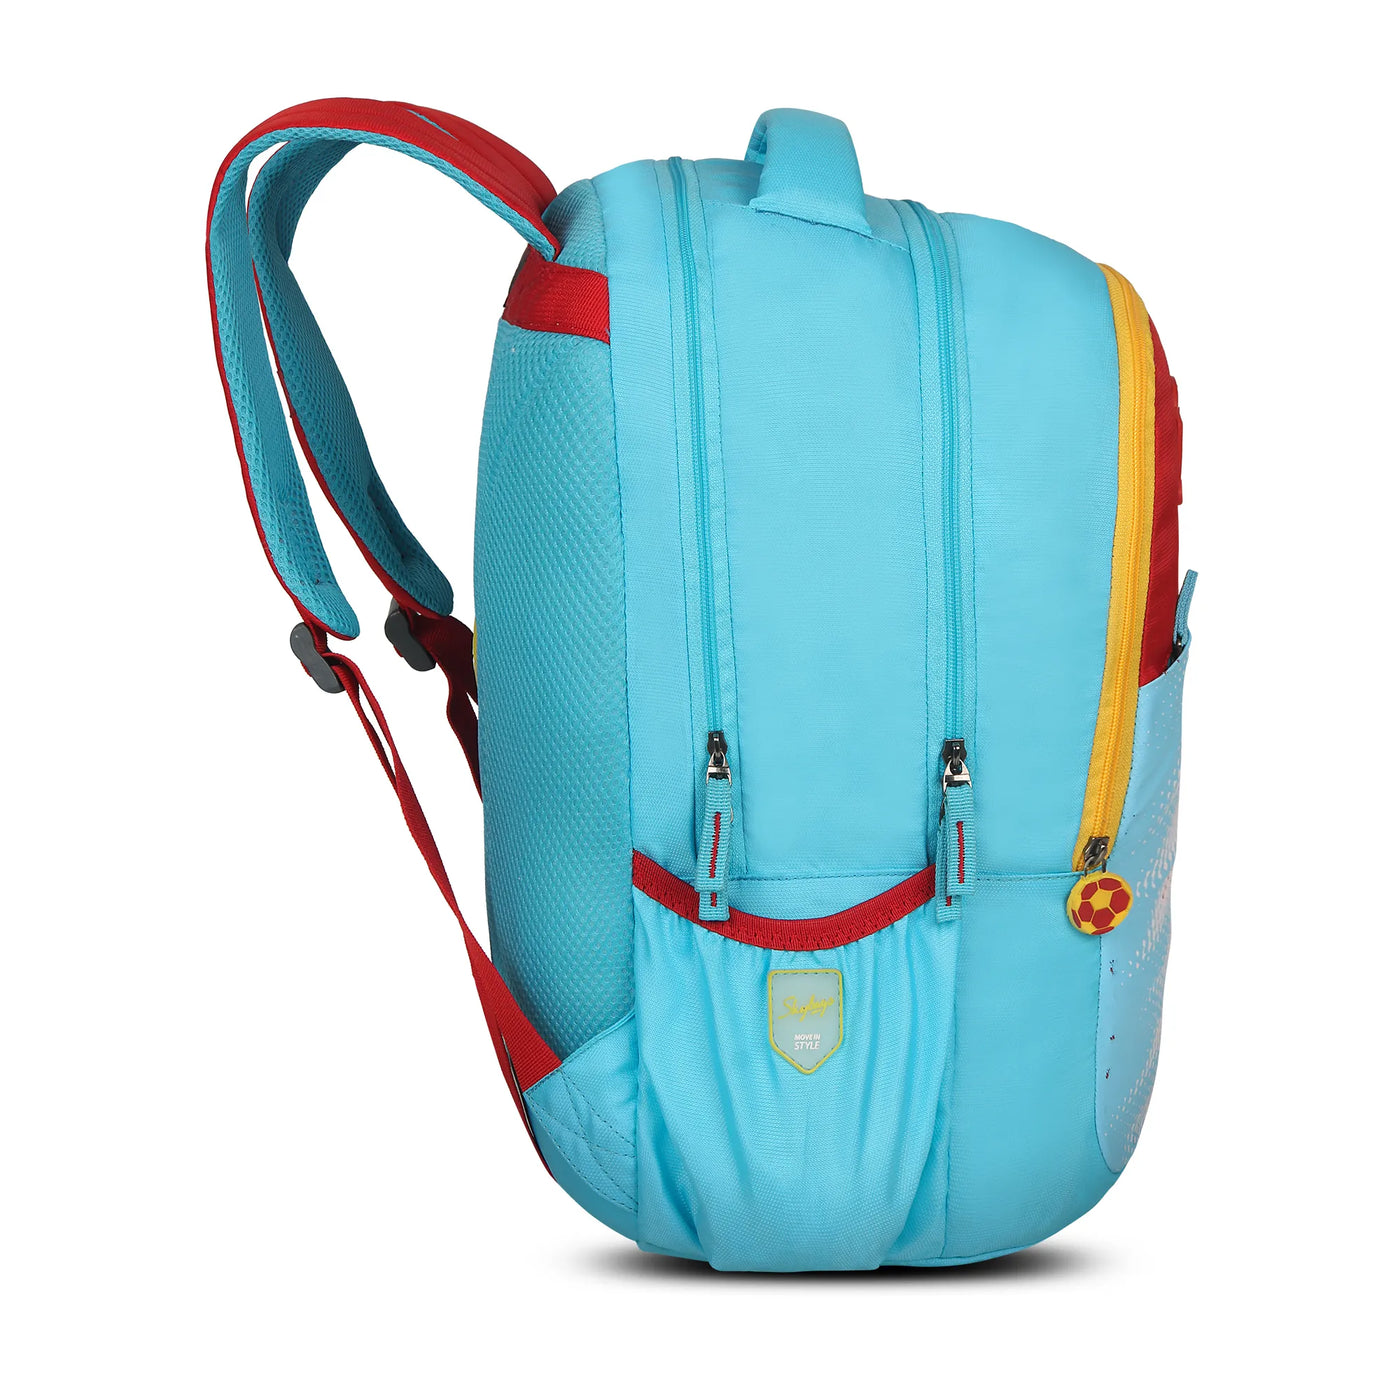 SKYBAGS CHASE "SCHOOL BACKPACK"